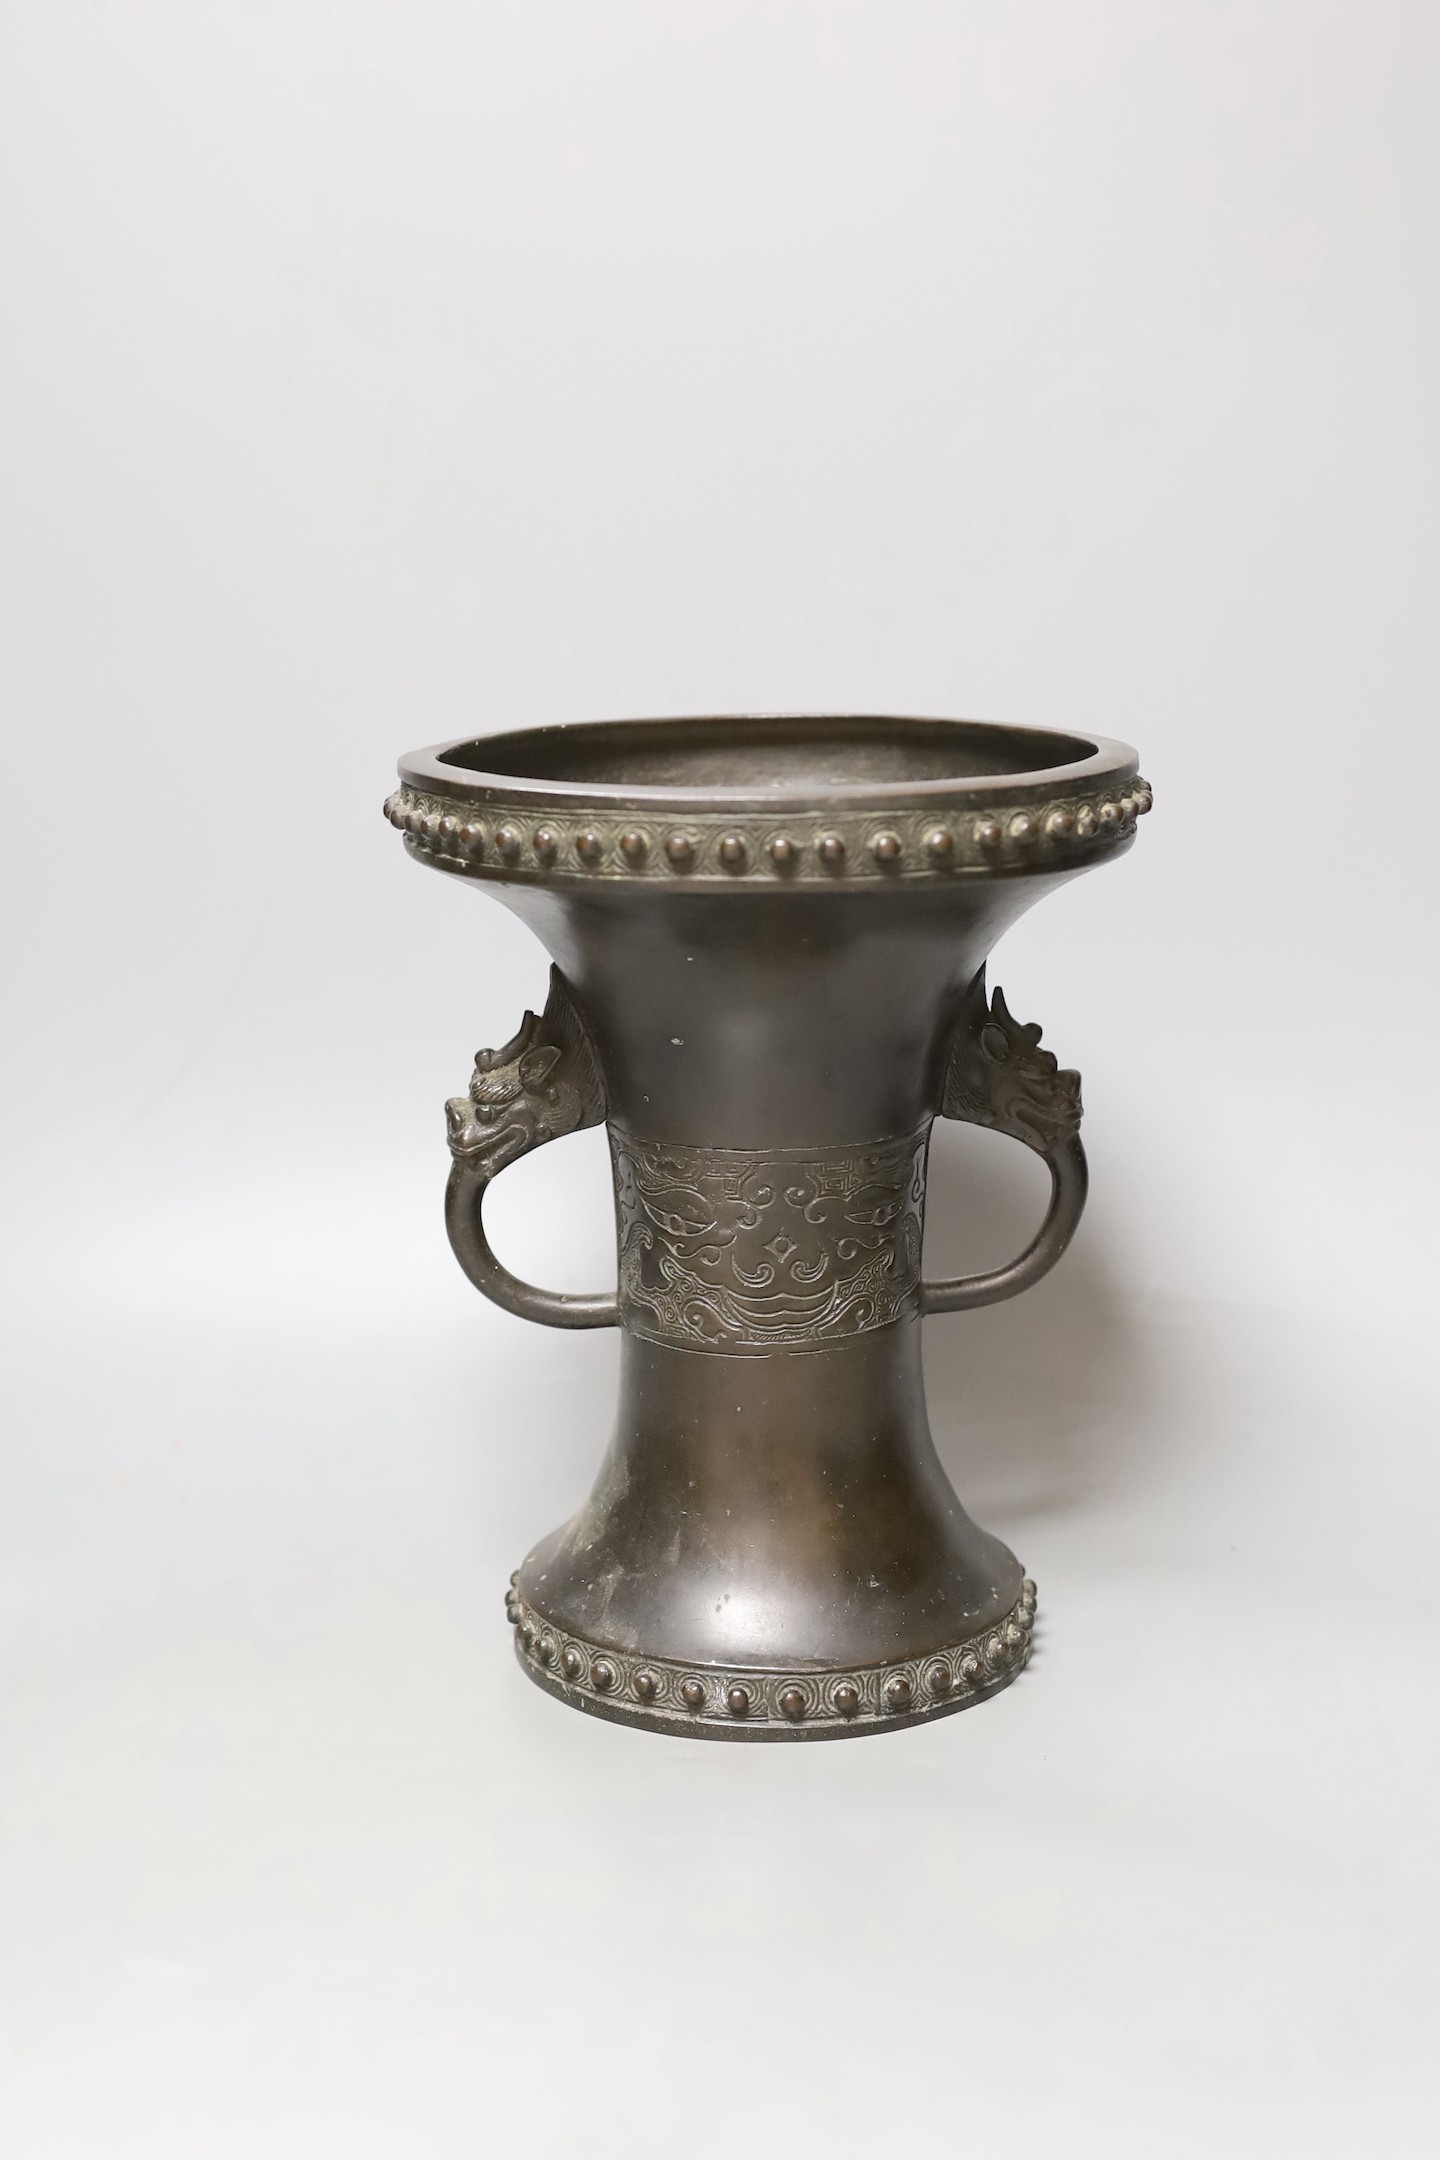 A Chinese or Japanese archaistic bronze two handle vase, 19th century, 24 cms high.